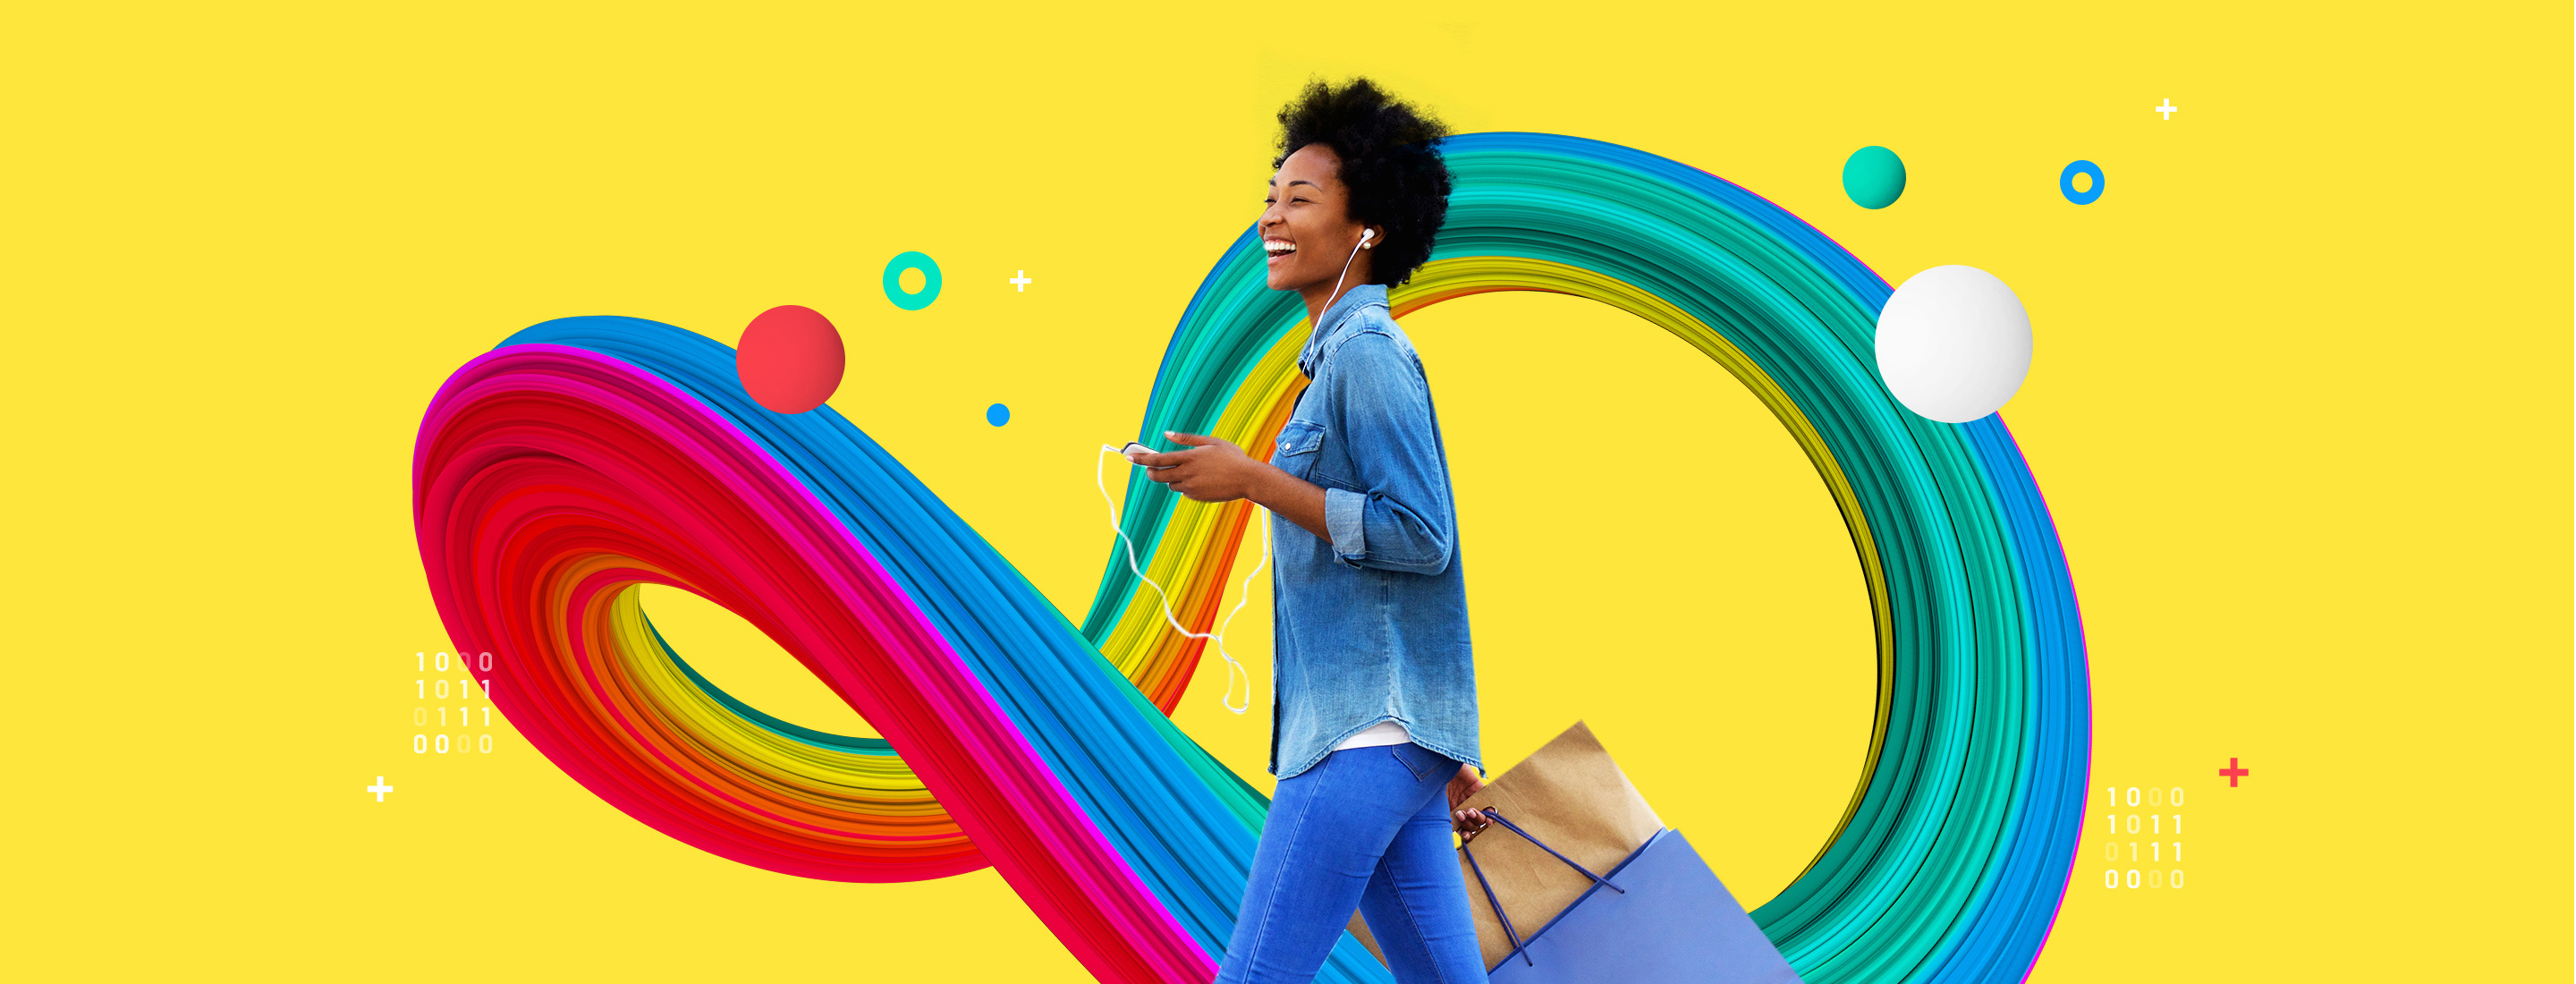 Woman walking with mobile and shopping bags over a brightly colored background